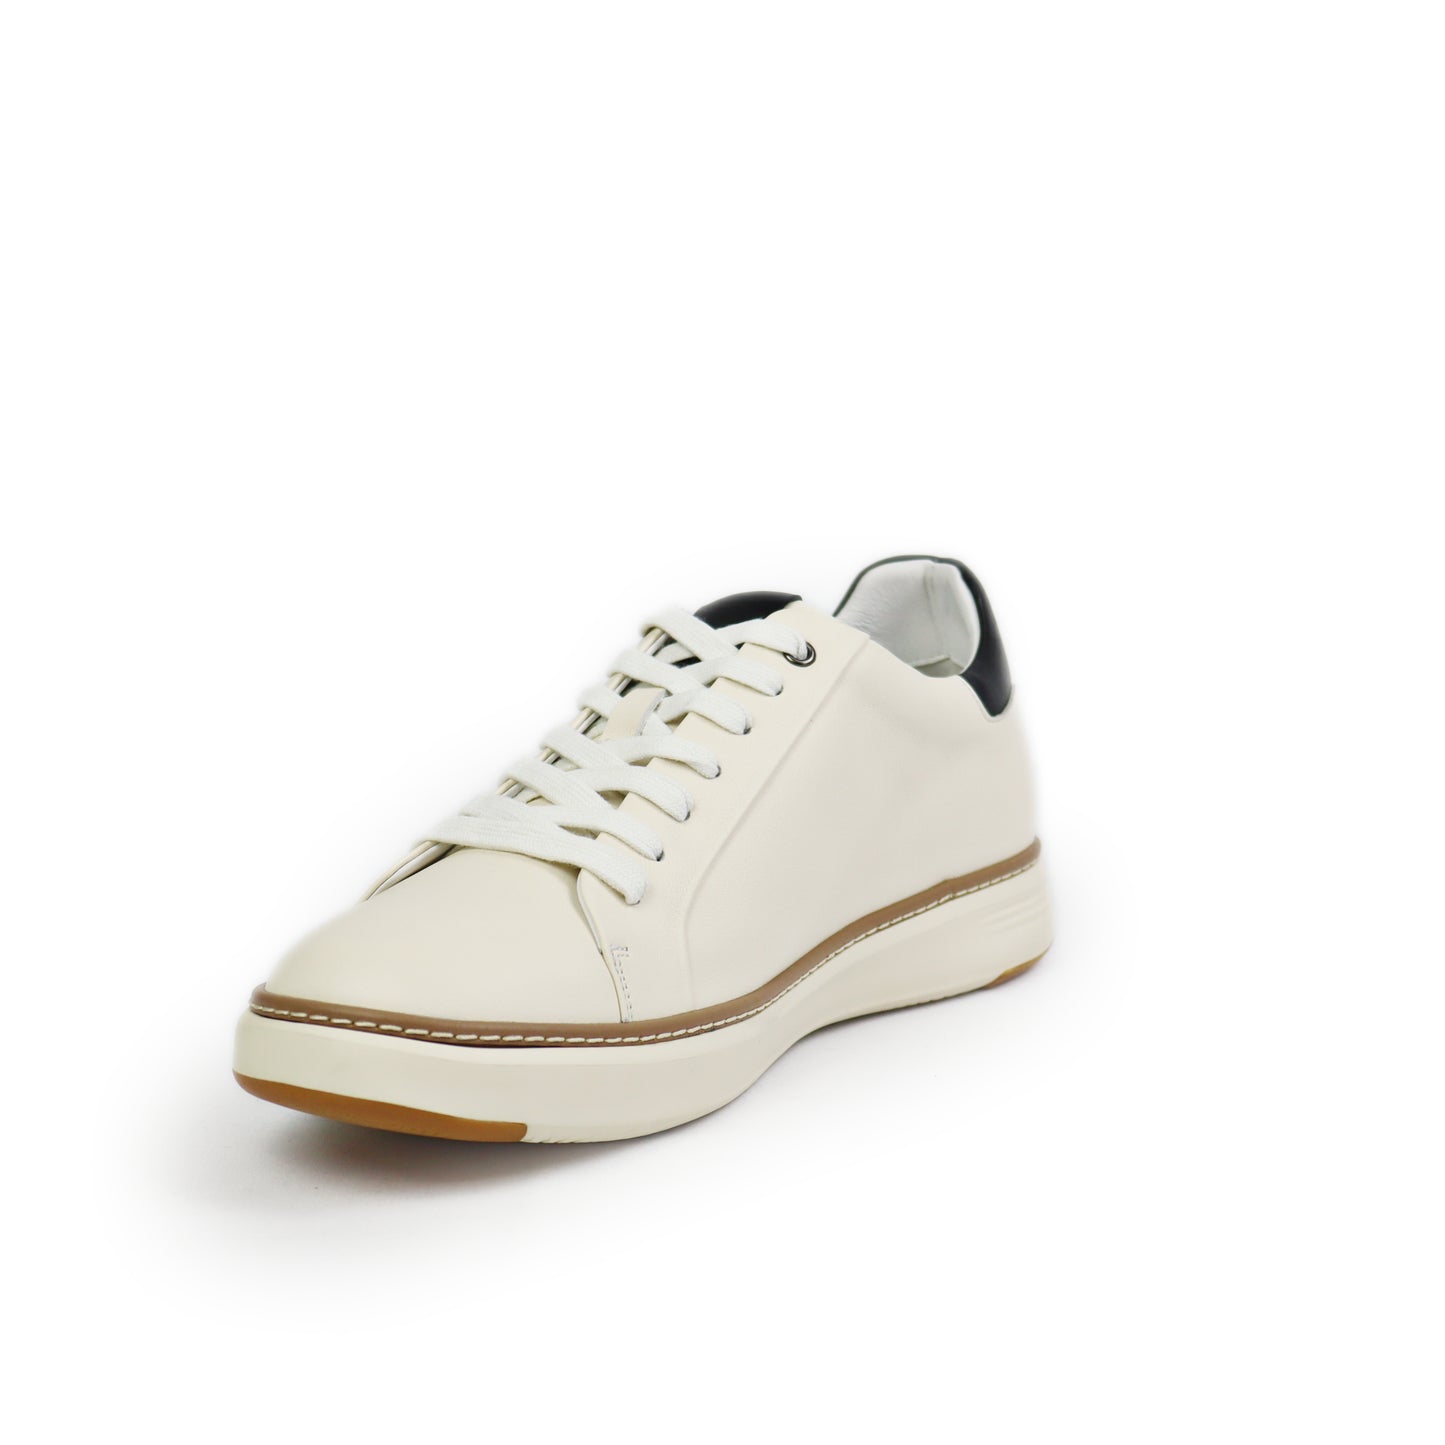 Volo Alte Chaves Lightweight Elevator Sneakers